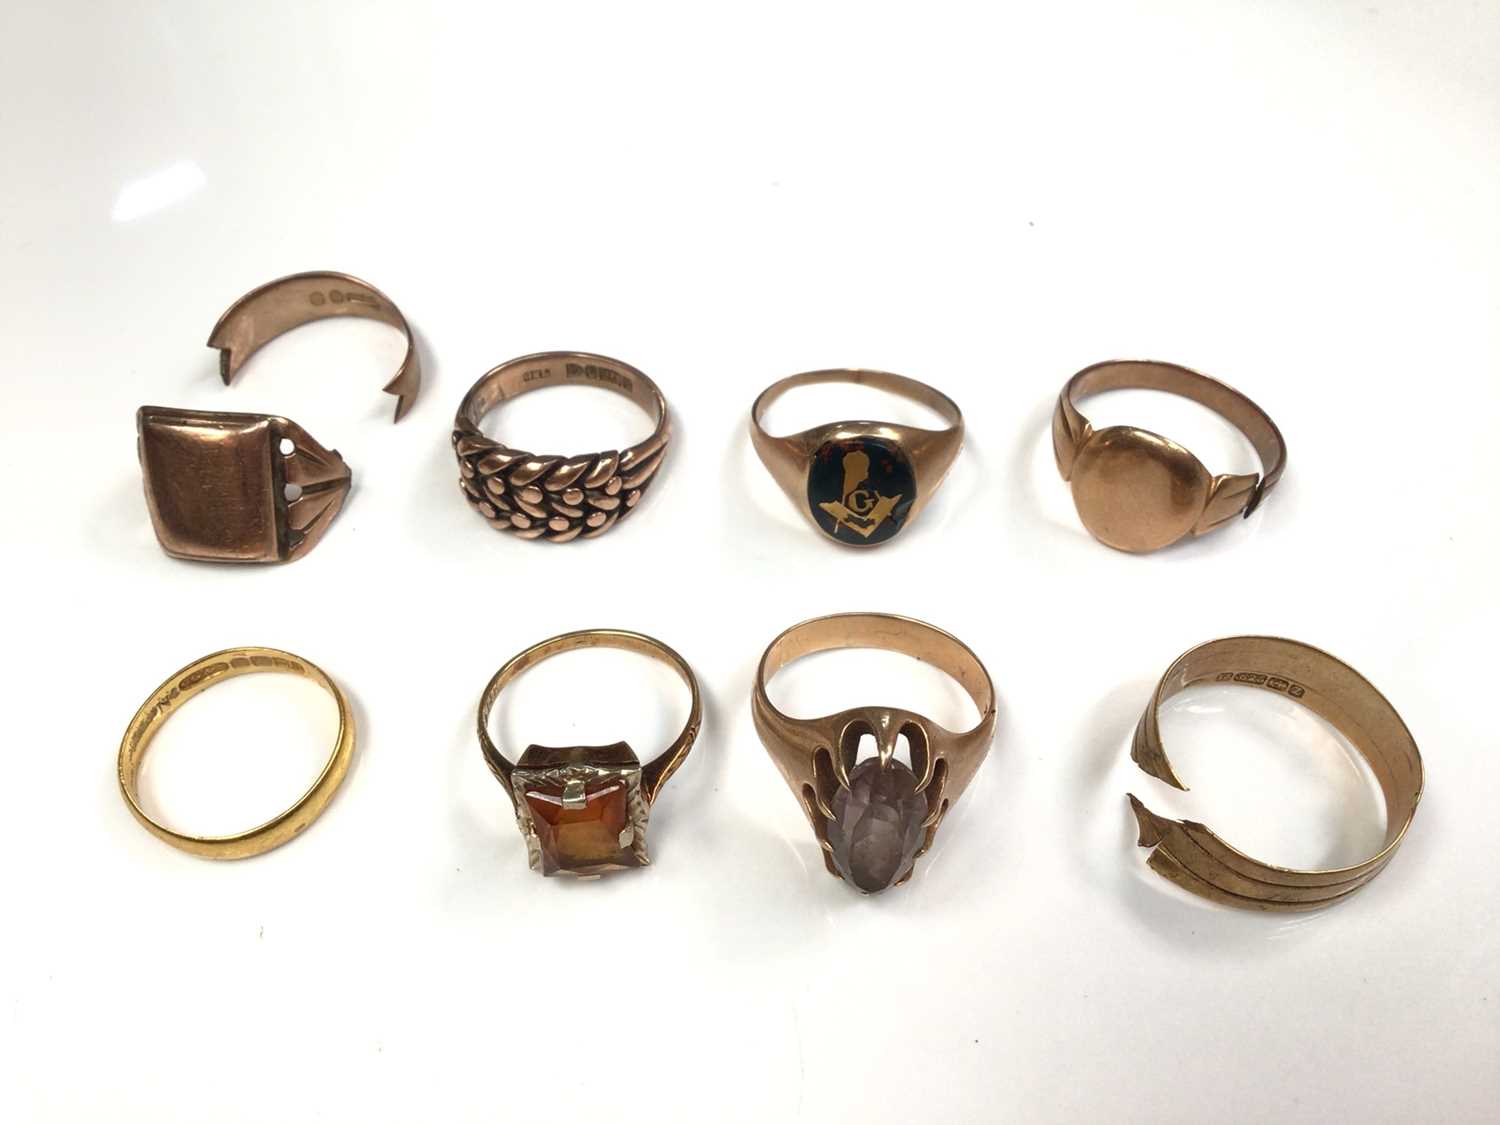 Lot 101 - 22ct gold wedding ring, 15ct gold ring, two 14ct gold gem set dress rings, two 9ct gold rings, Masonic signet ring stamped 10k and one other signet ring (8)